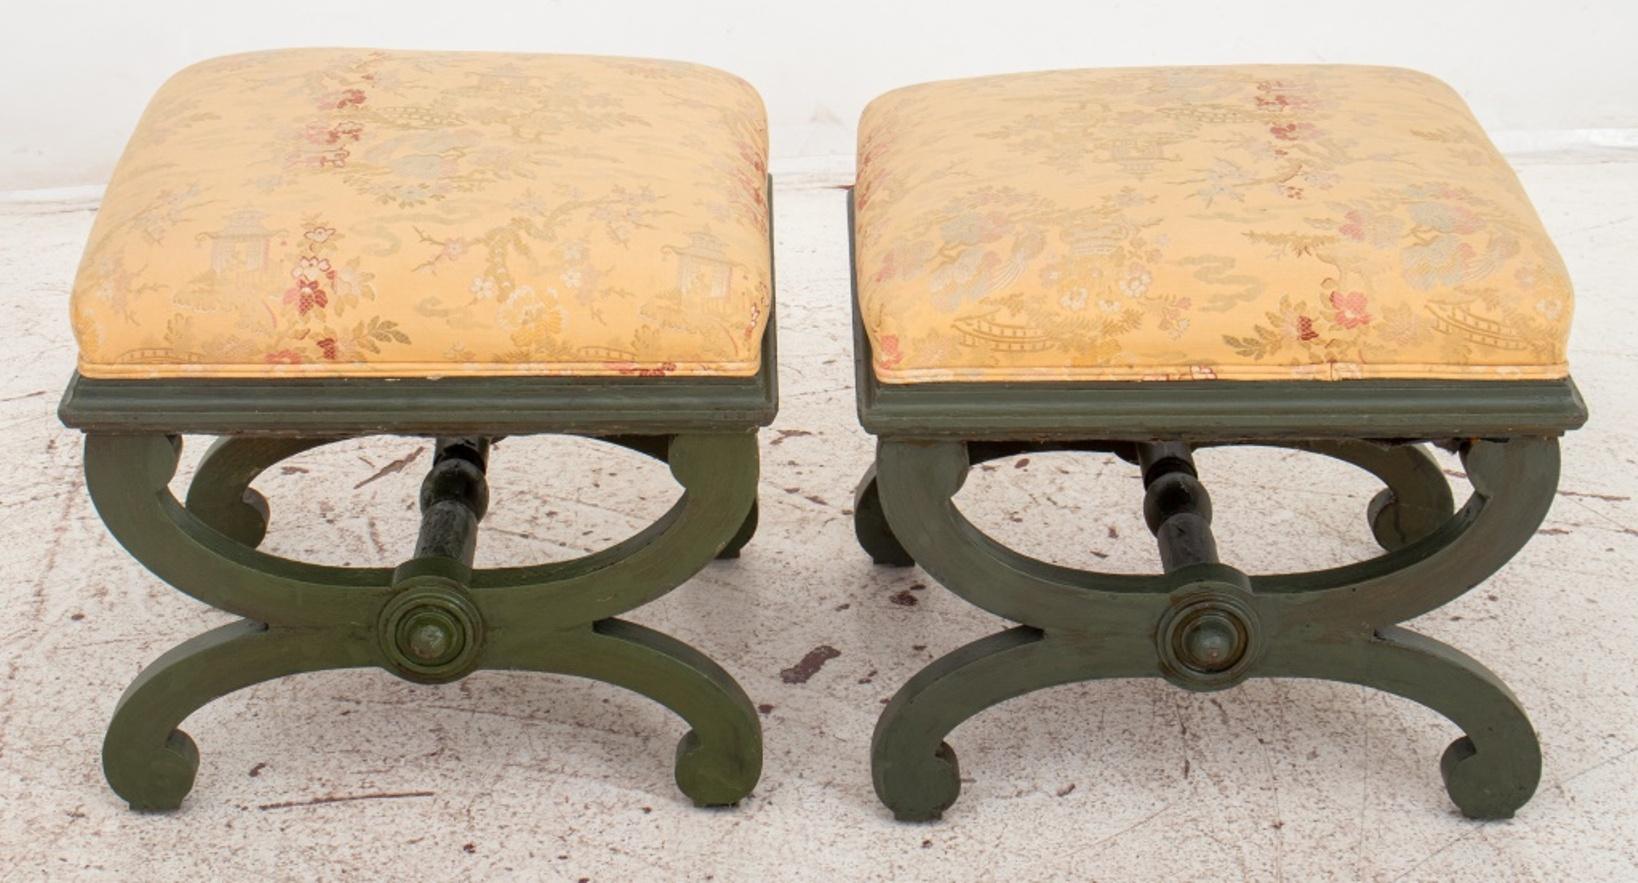 Victorian pair of painted wood stools in green with an Asian style textile upholstery.

Dimensions: 18.5